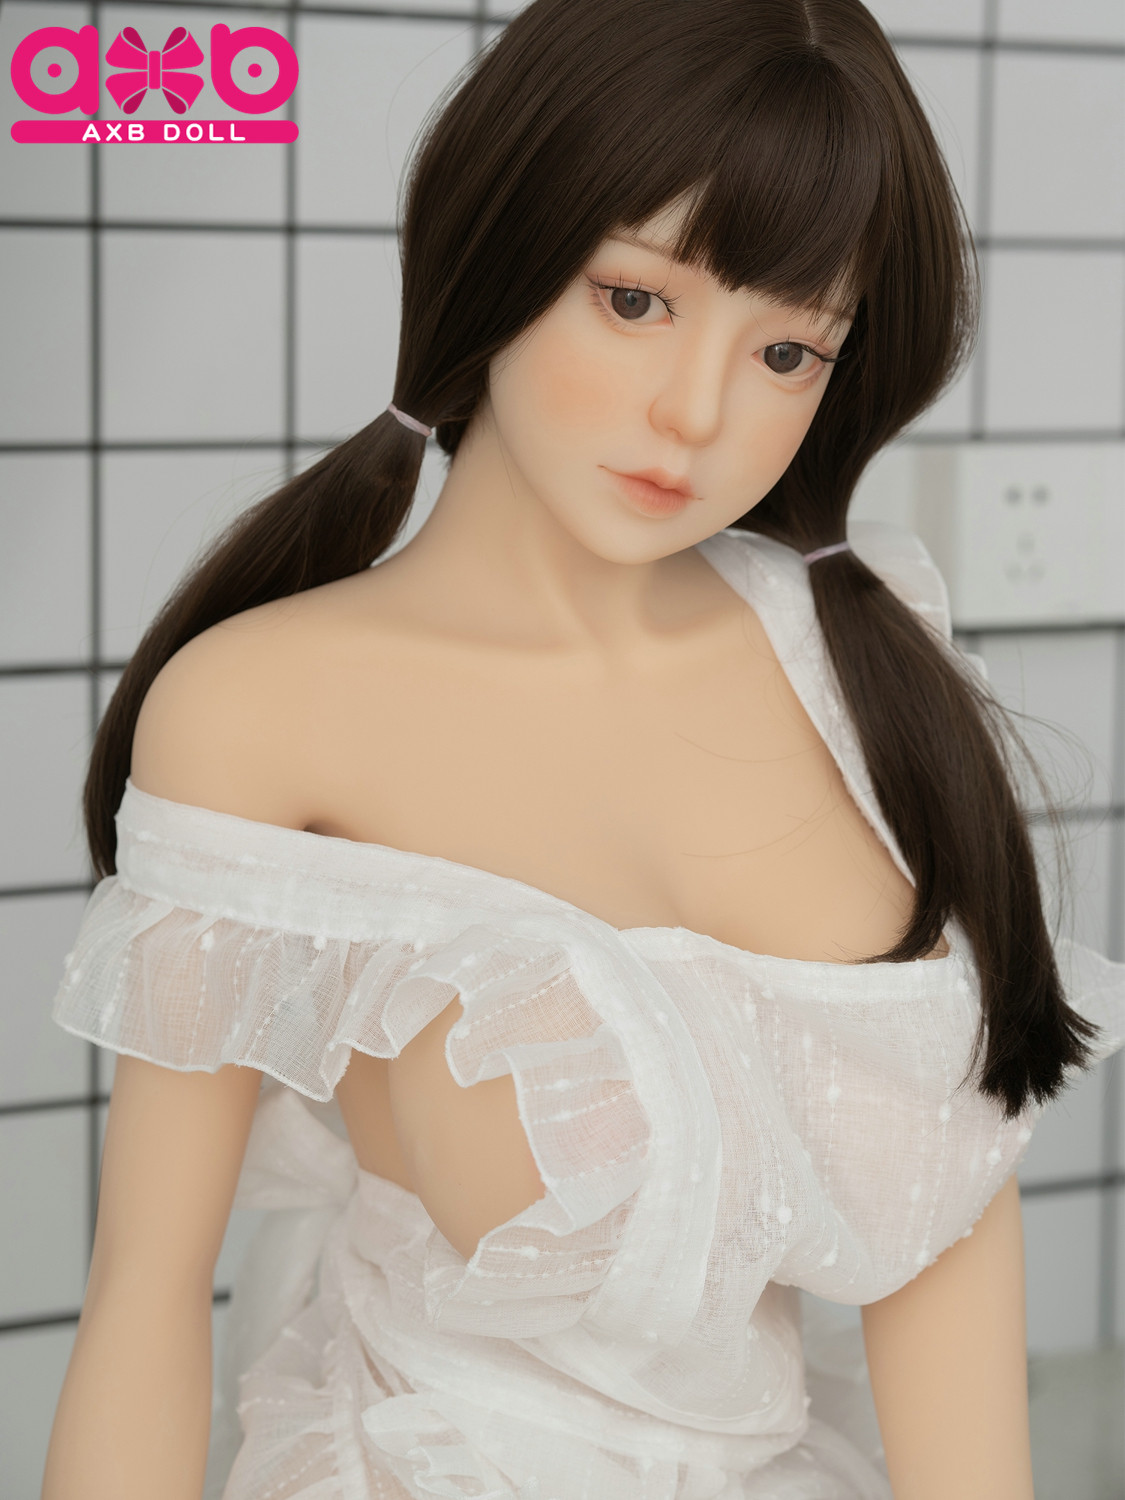 AXBDOLL 140cm A56# TPE Big Breast Sex Doll Love Doll For Men - Click Image to Close